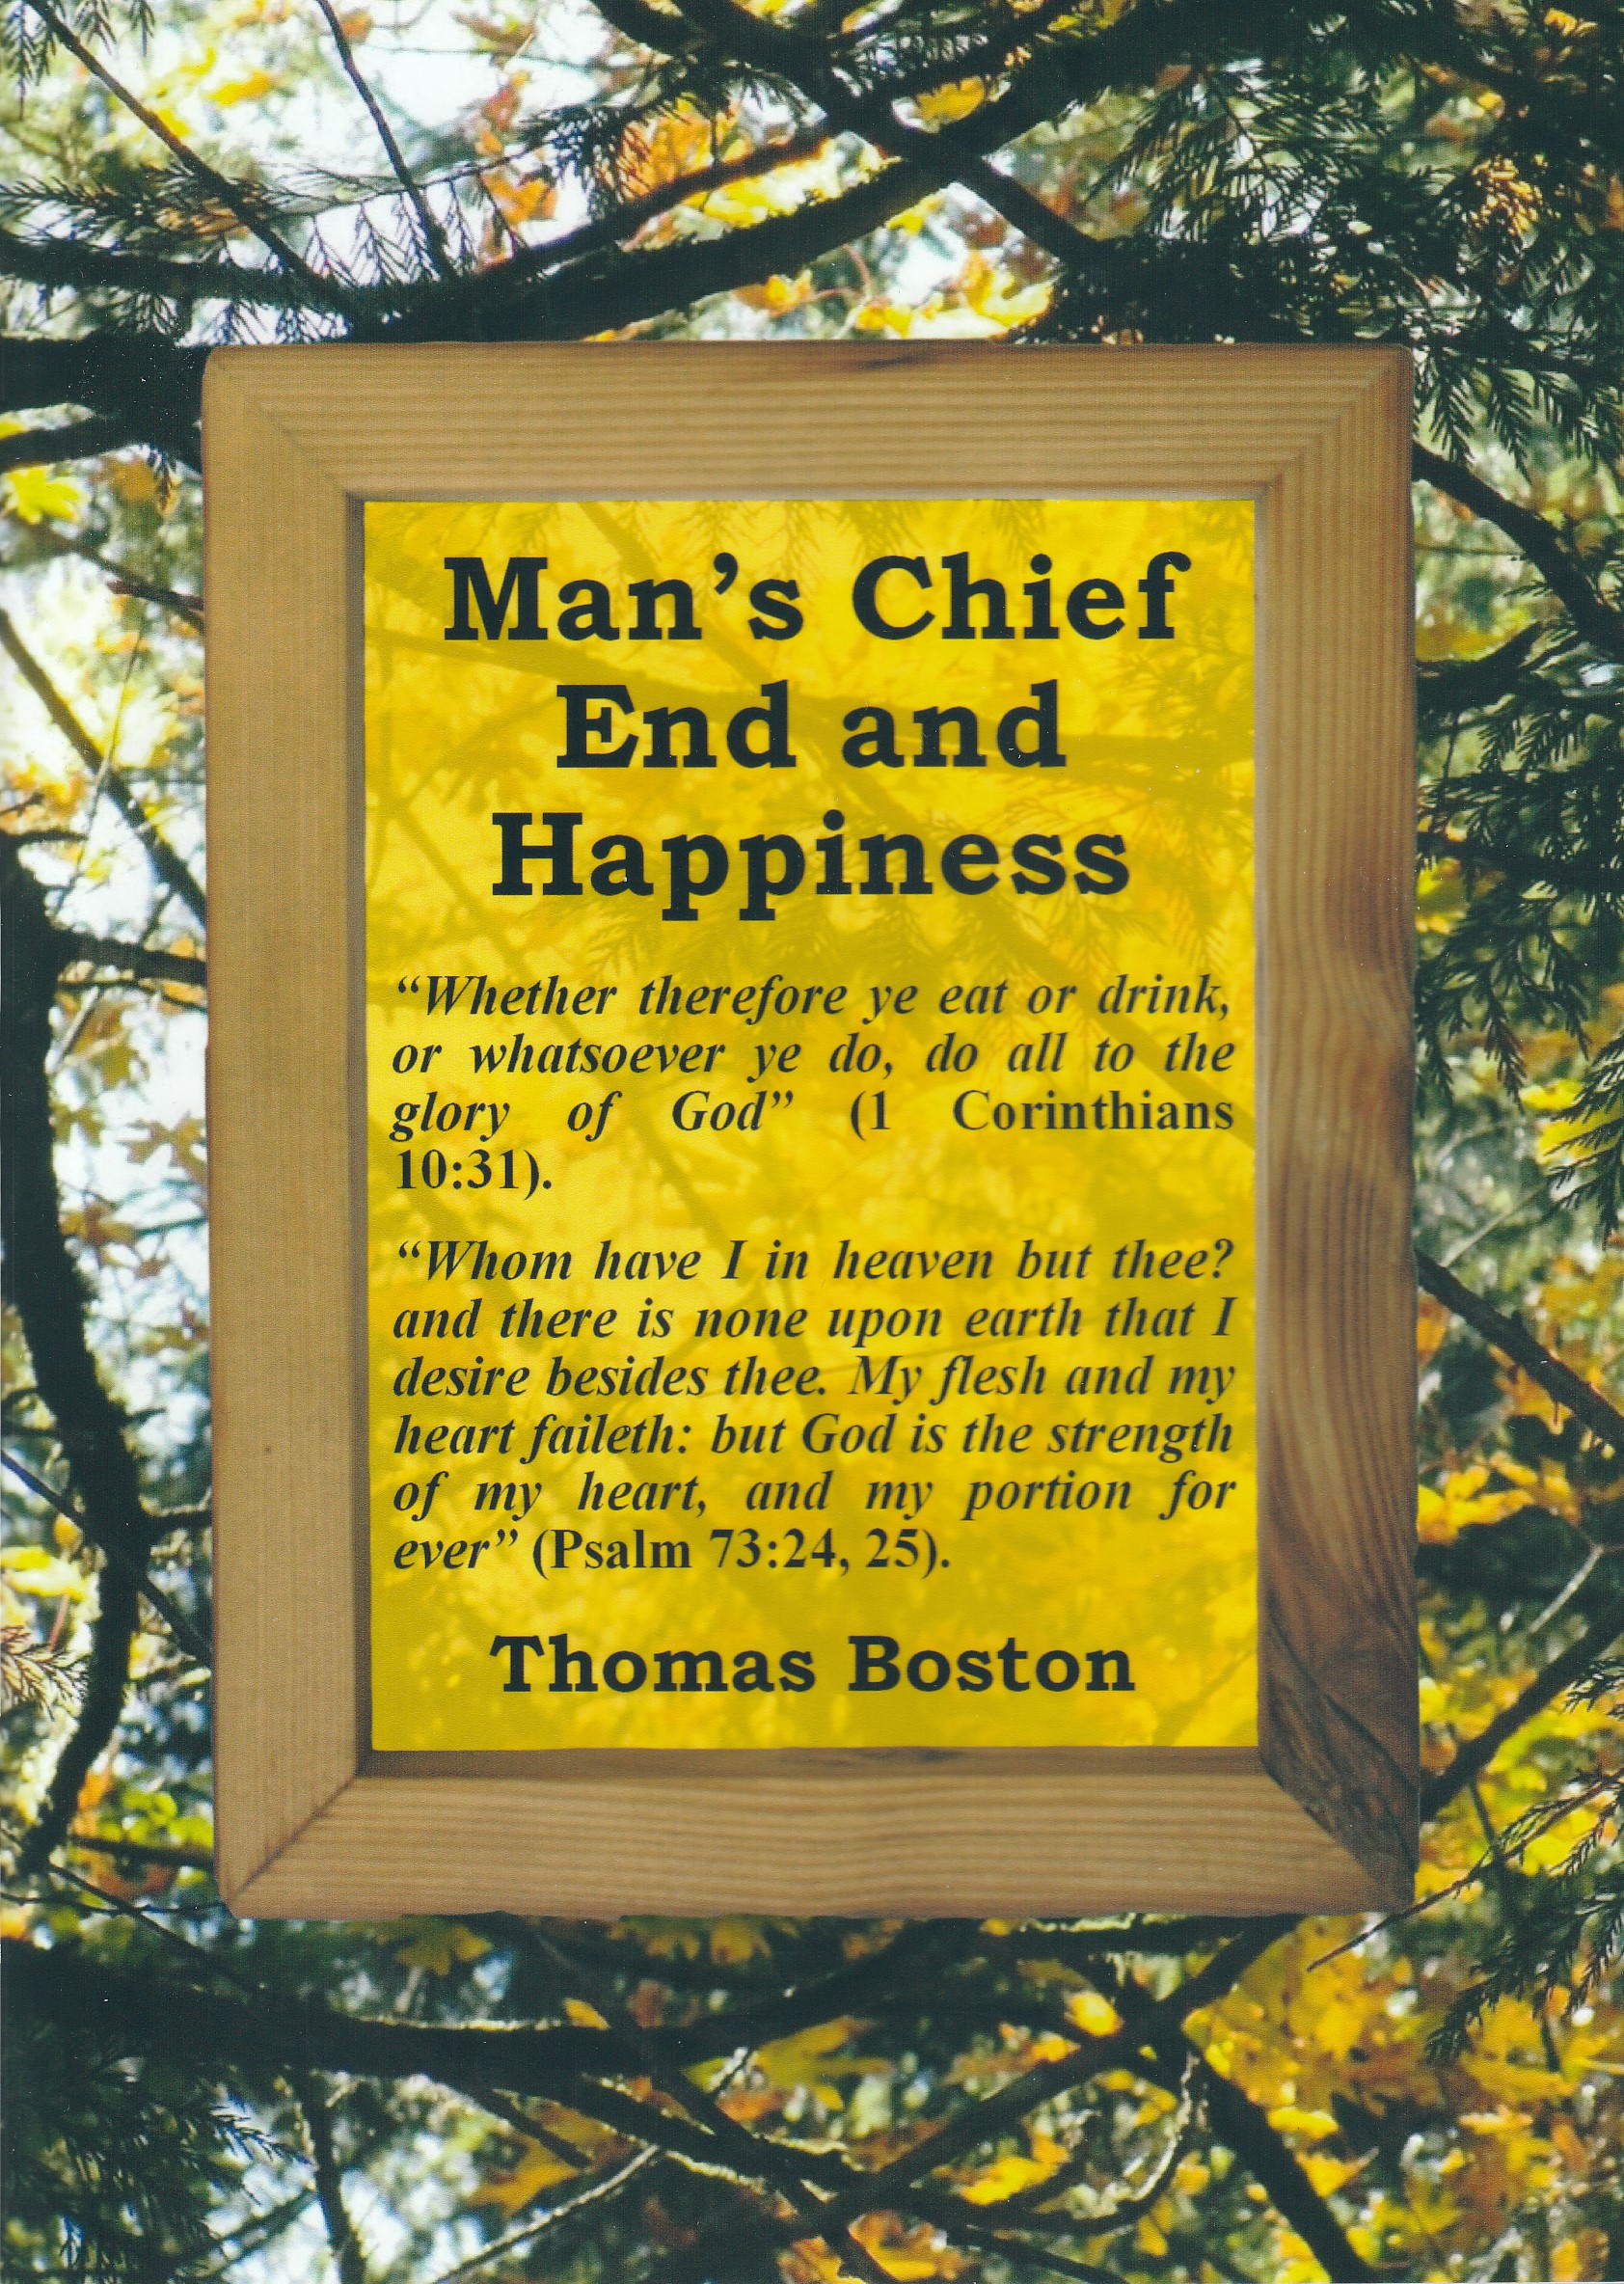 Man's Chief End and Happiness